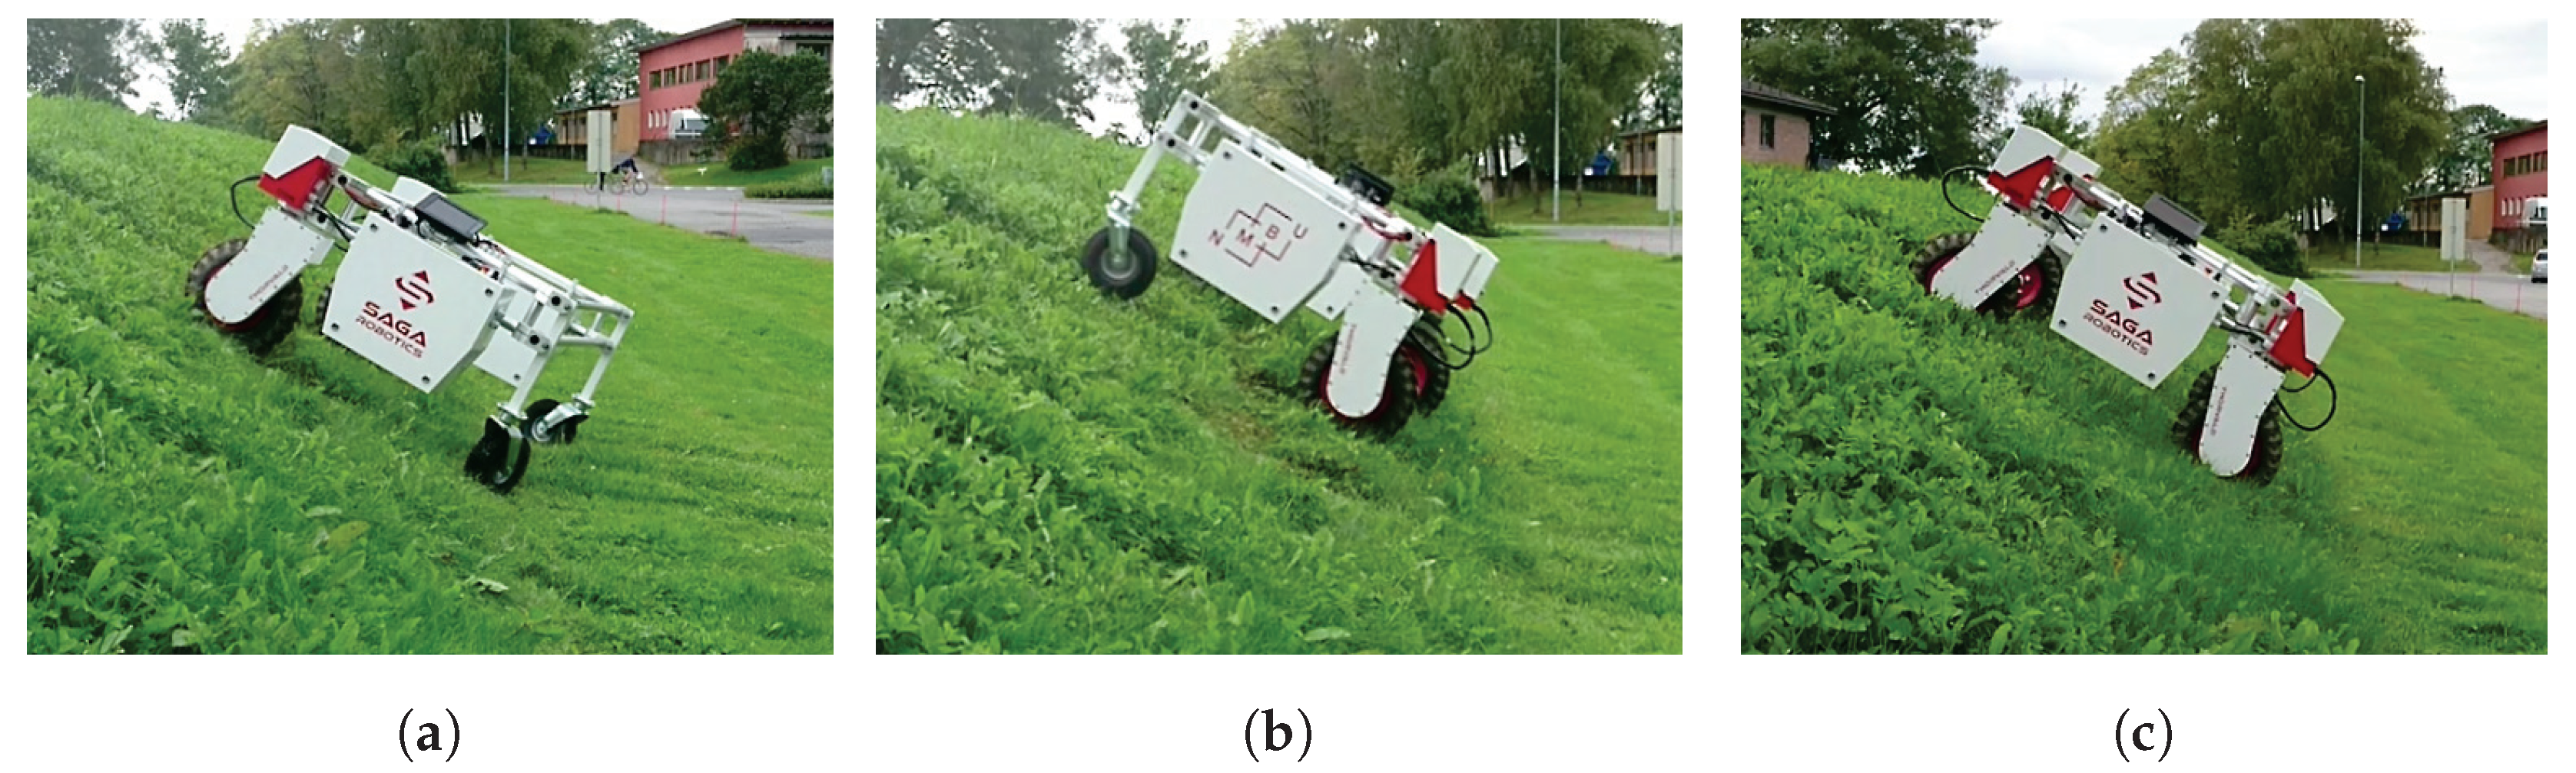 Robotics | Free Full-Text | The Thorvald II Agricultural Robotic System